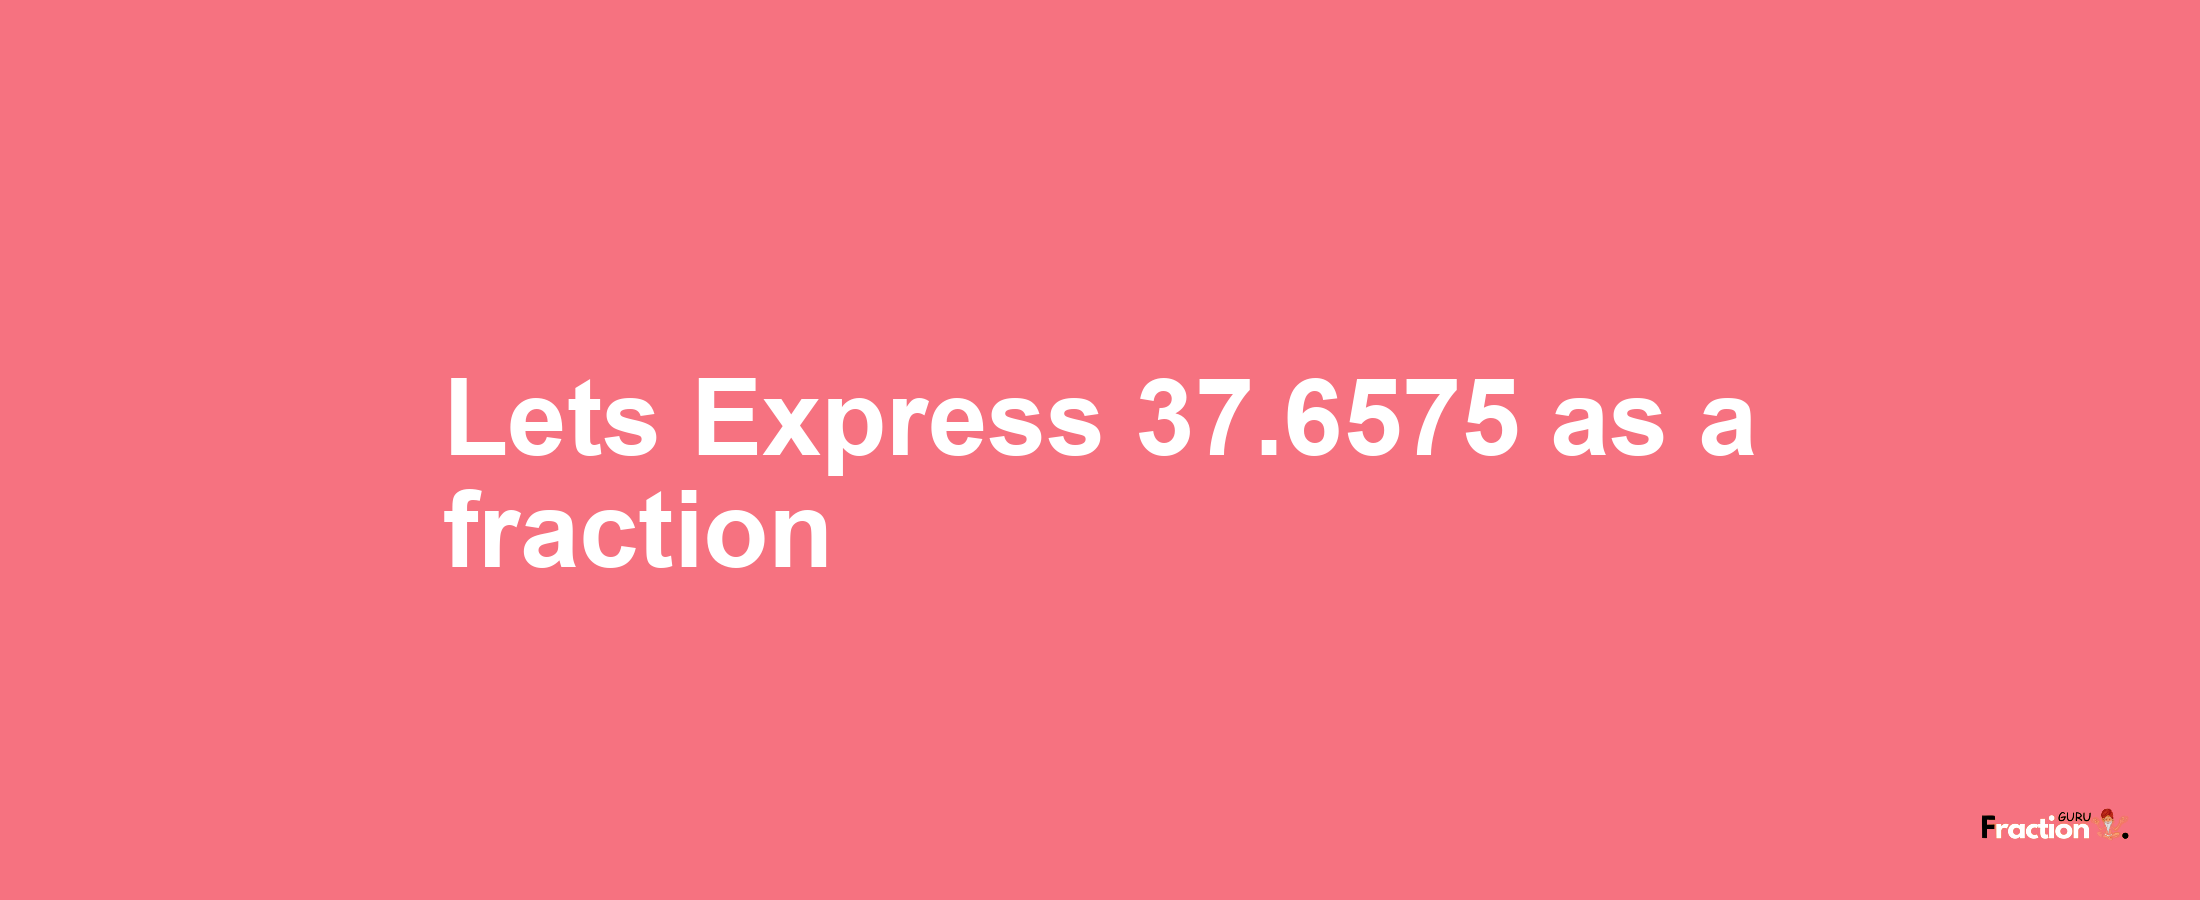 Lets Express 37.6575 as afraction